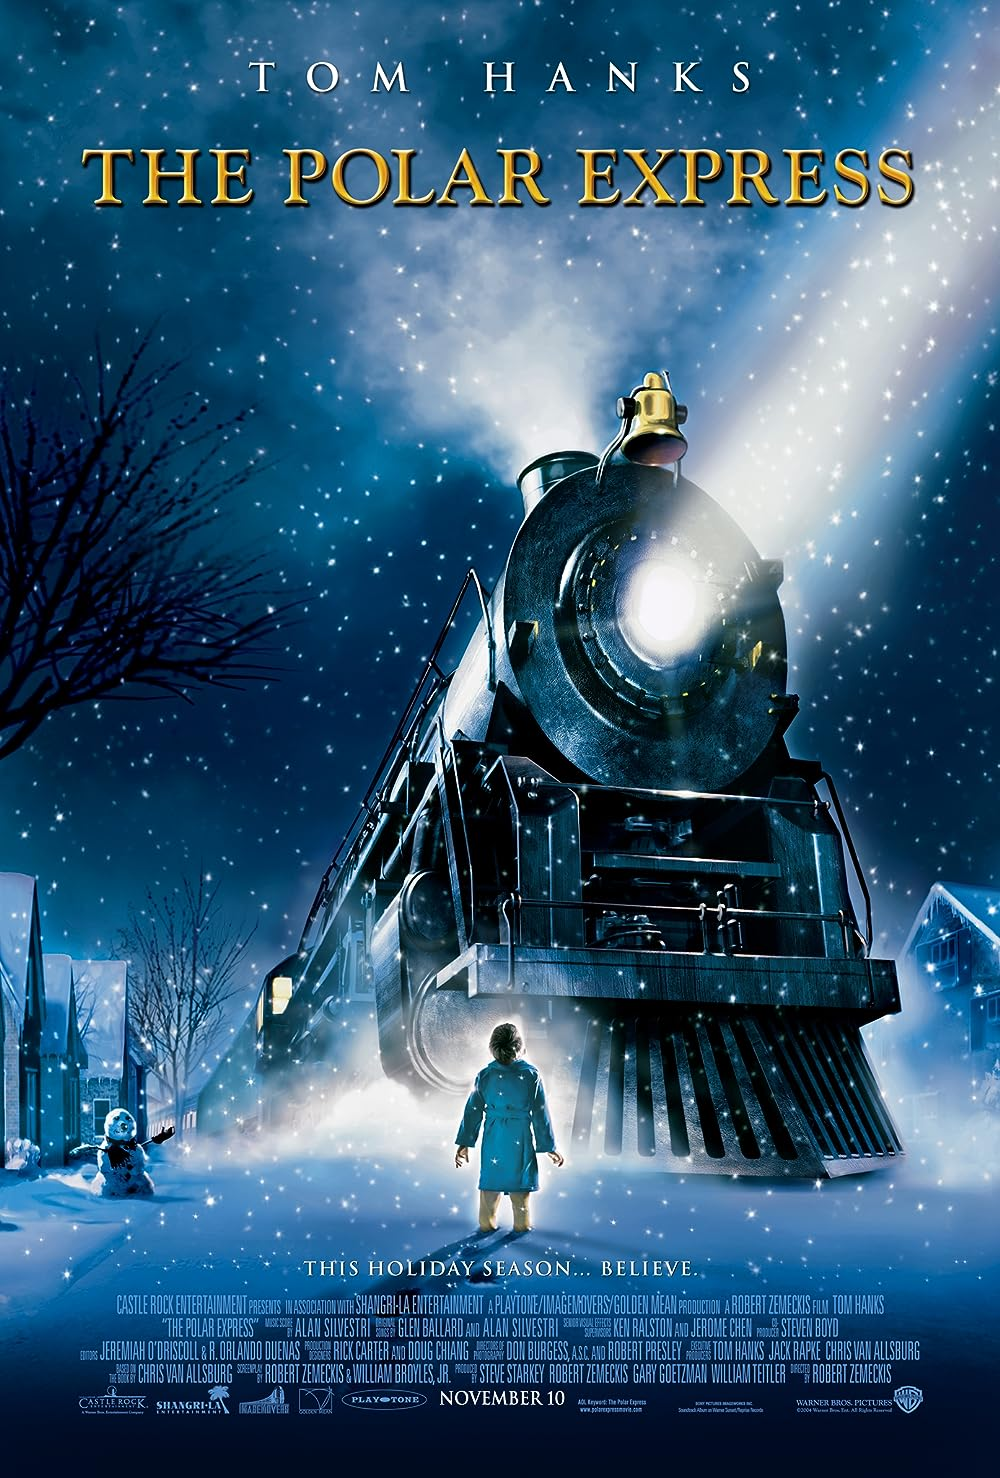 The Polar Express (2004): A Journey into Belief and Childhood Wonder